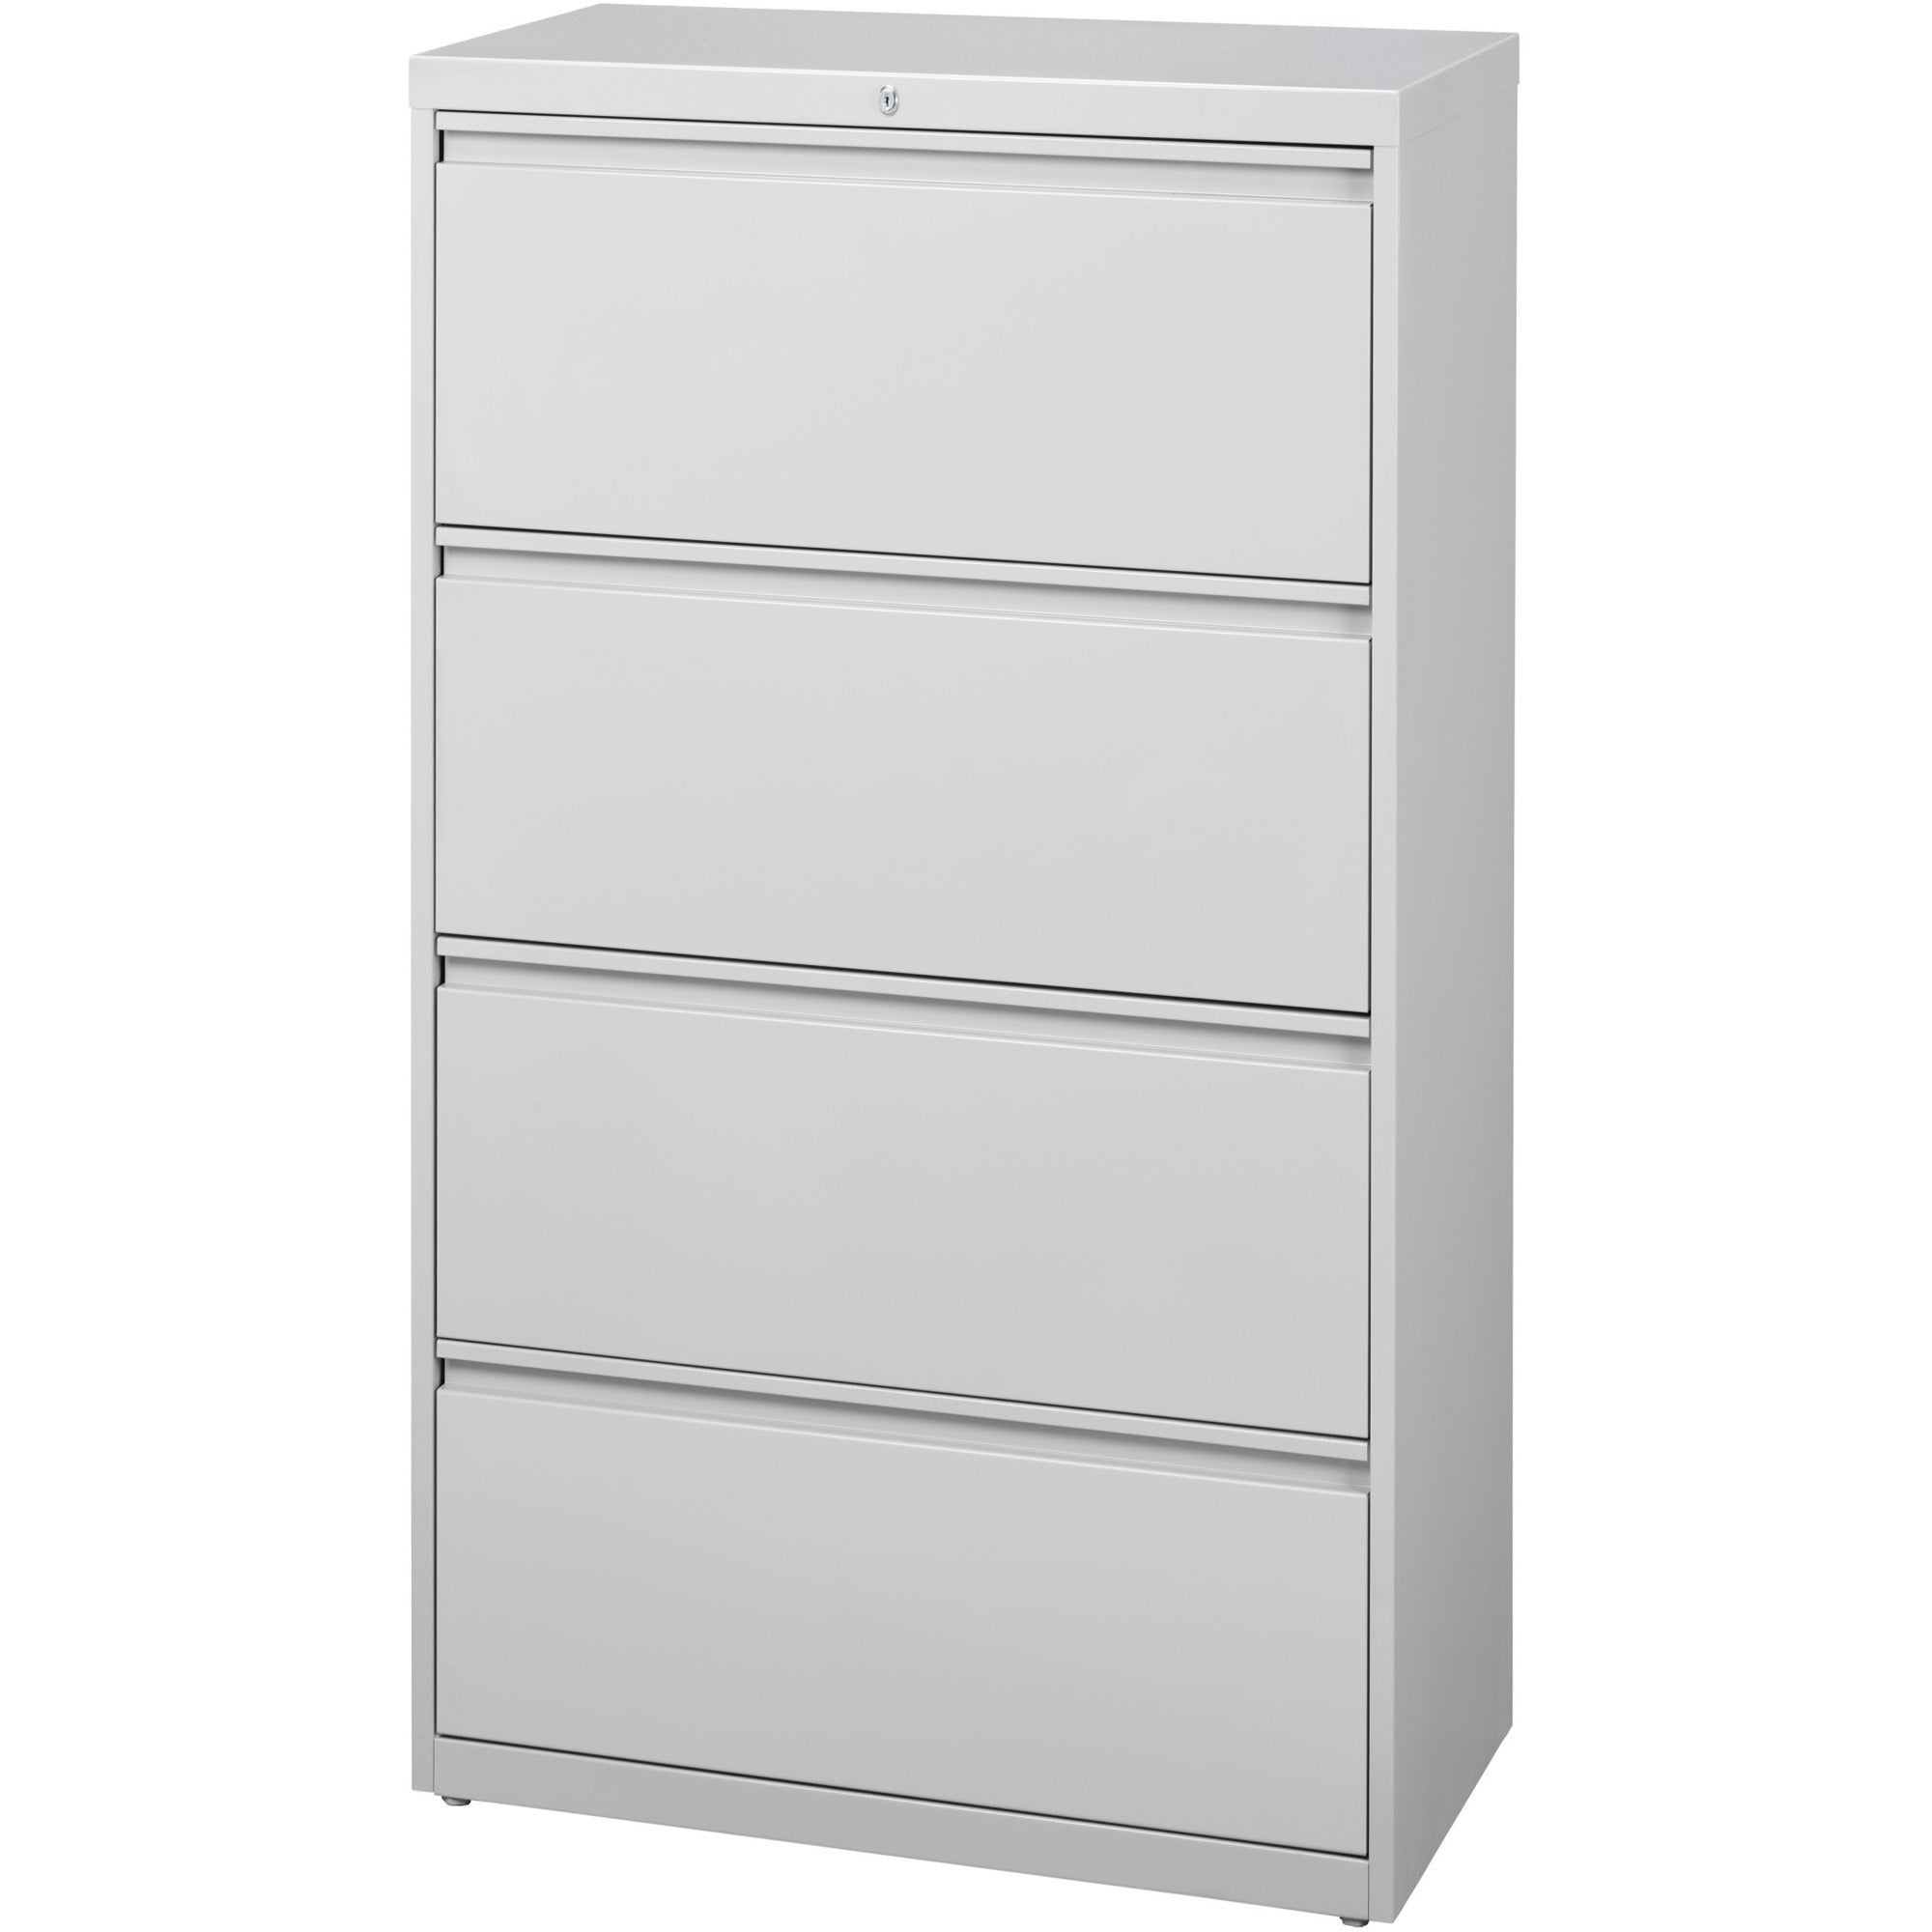 Lorell Fortress Series Lateral File - 36" x 18.6" x 52.5" - 4 x Drawer(s) for File - Legal, Letter, A4 - Lateral - Rust Proof, Leveling Glide, Interlocking, Ball-bearing Suspension, Label Holder - Light Gray - Baked Enamel - Steel - Recycled - 